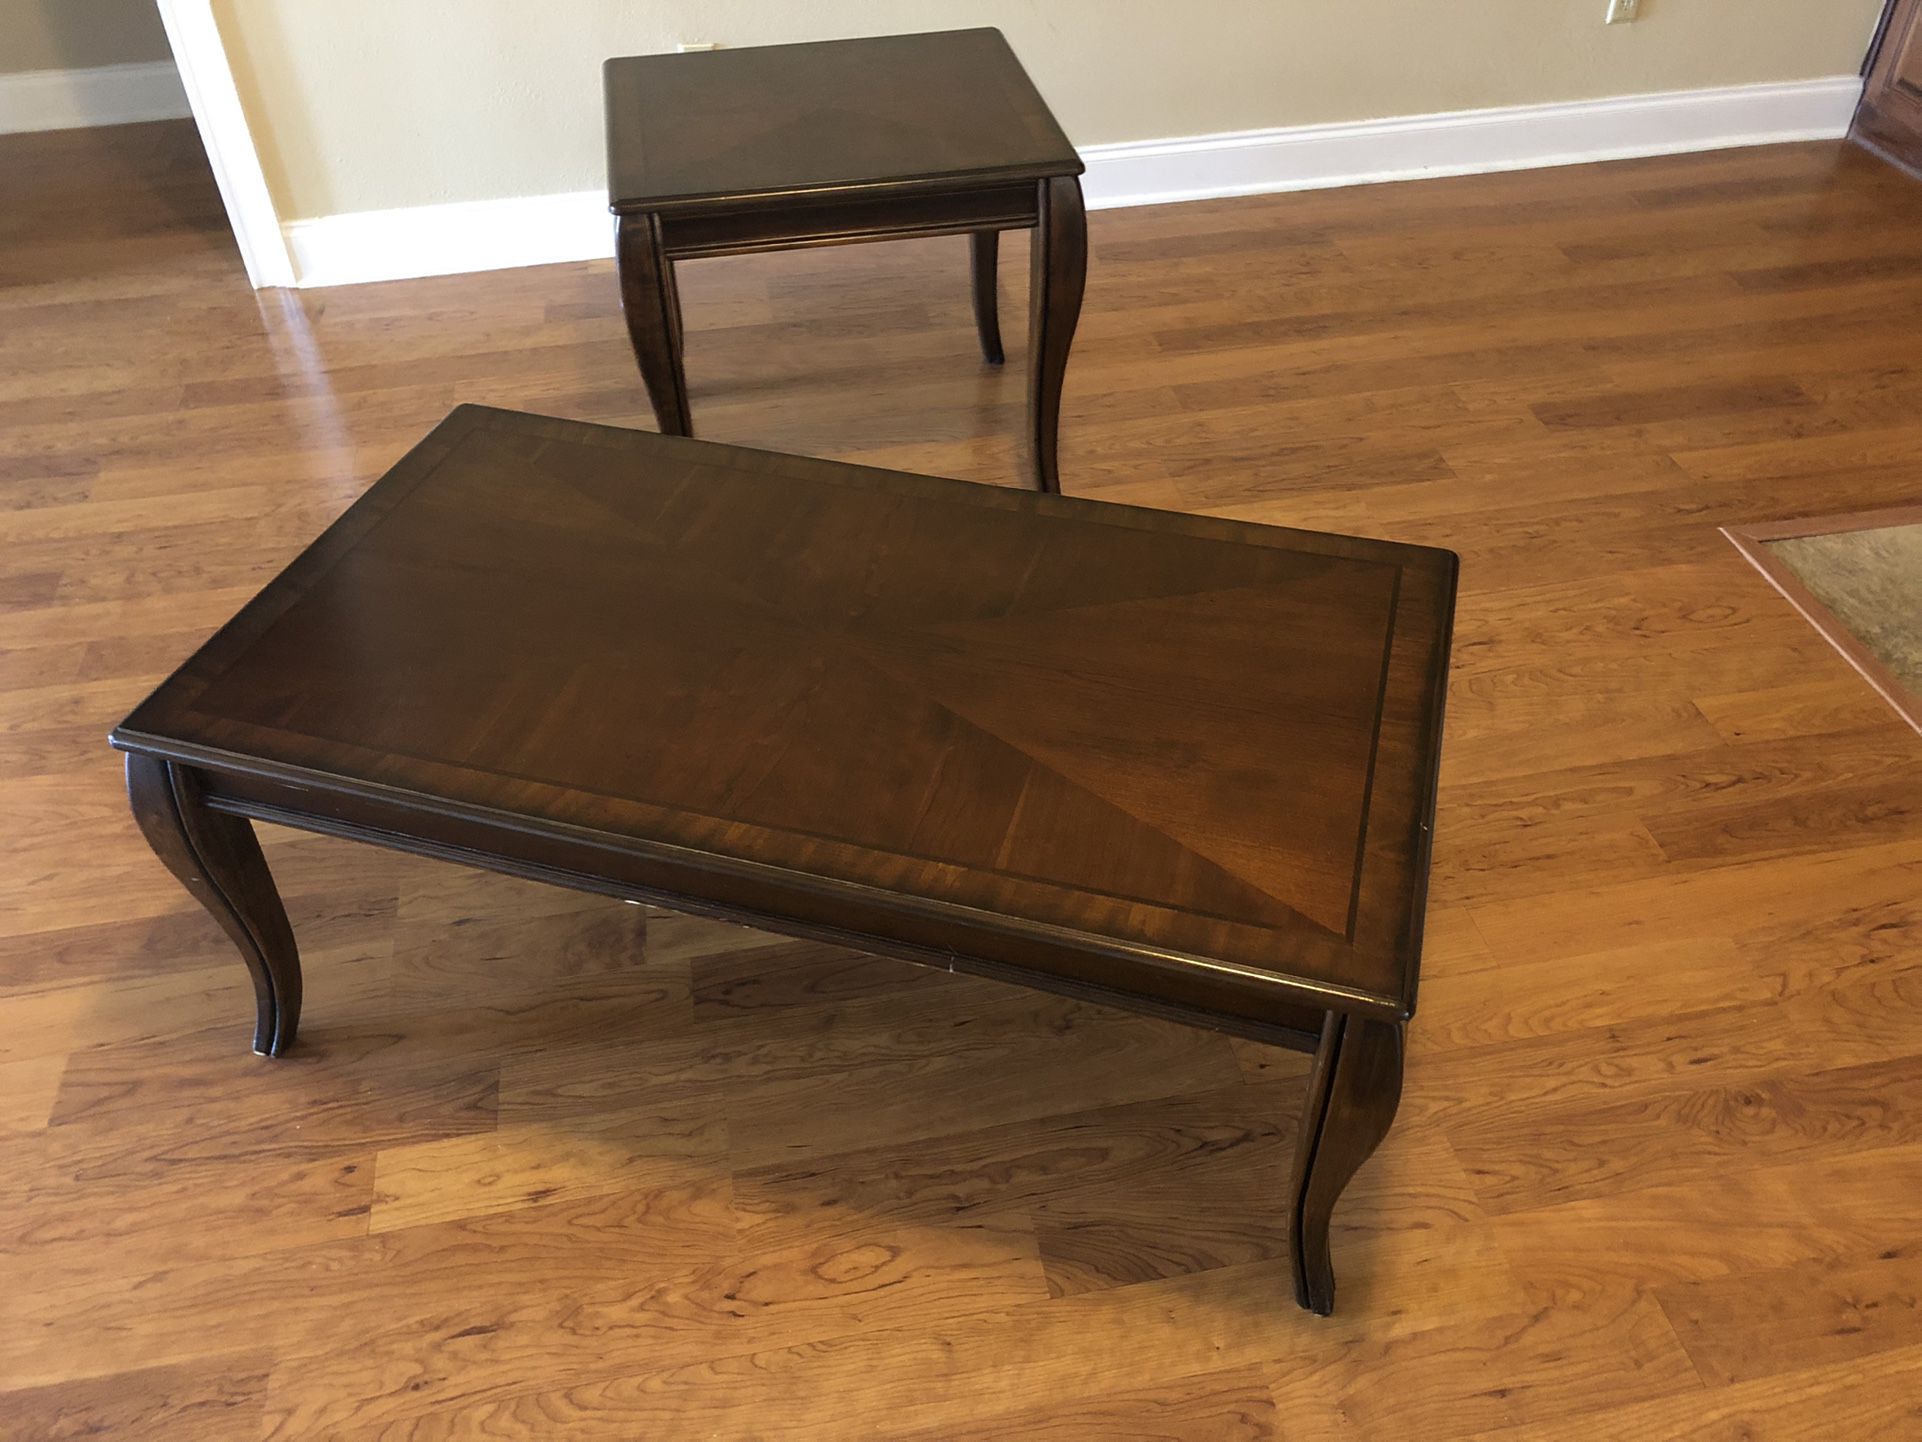 Coffee Tables (3 Pieces Total)